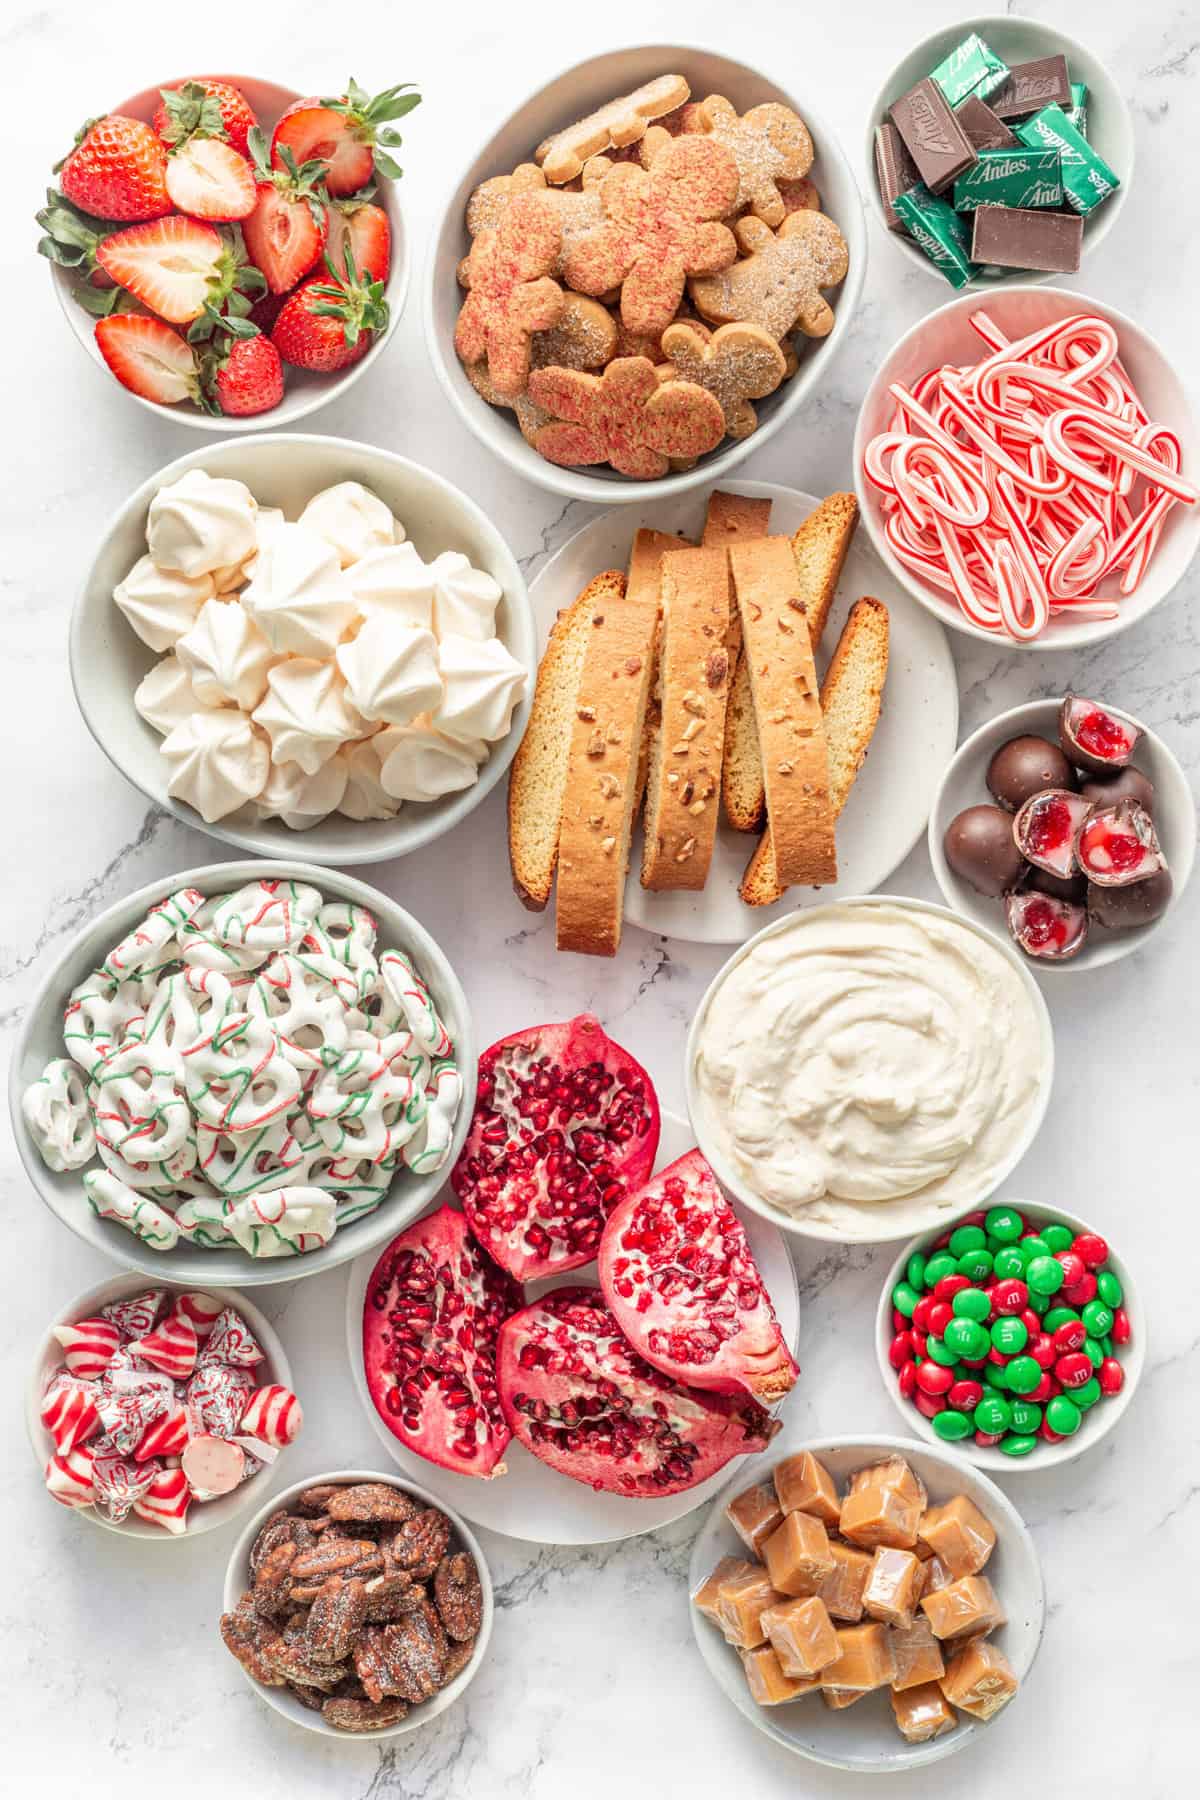 ingredients needed to build a christmas dessert charcuterie board.